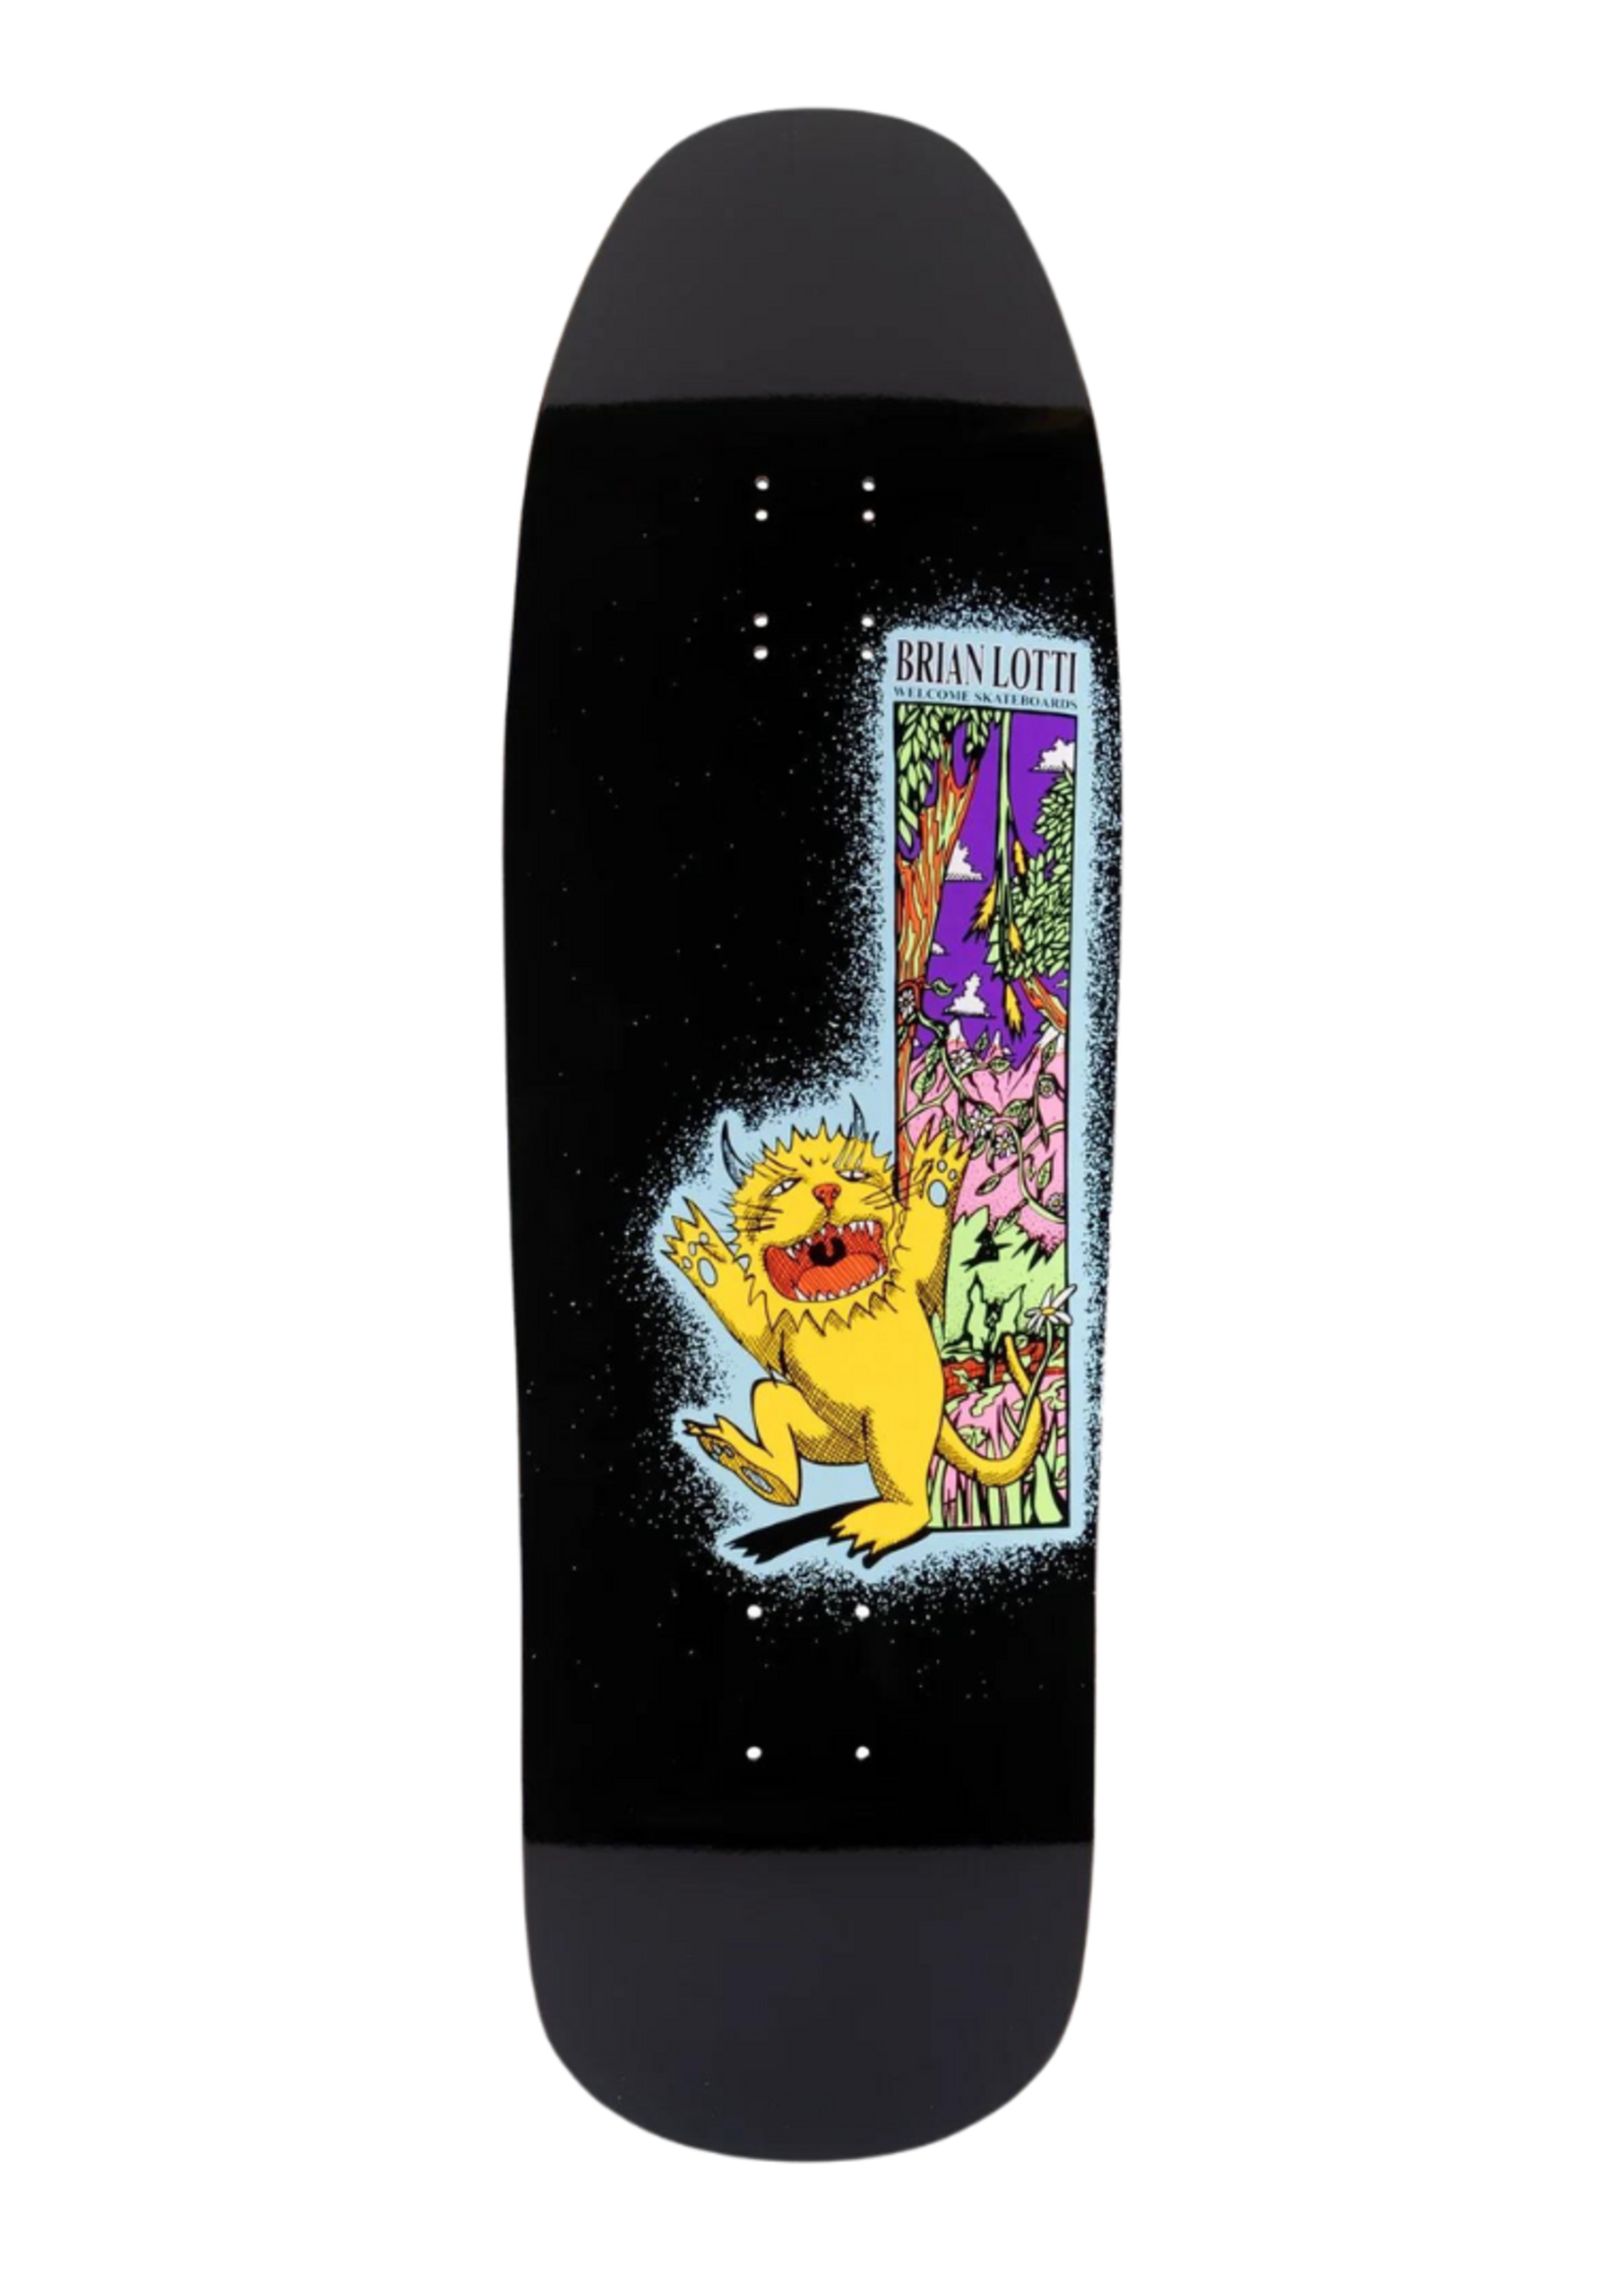 WELCOME BRIAN LOTTI WILD THING 9.6" DECK